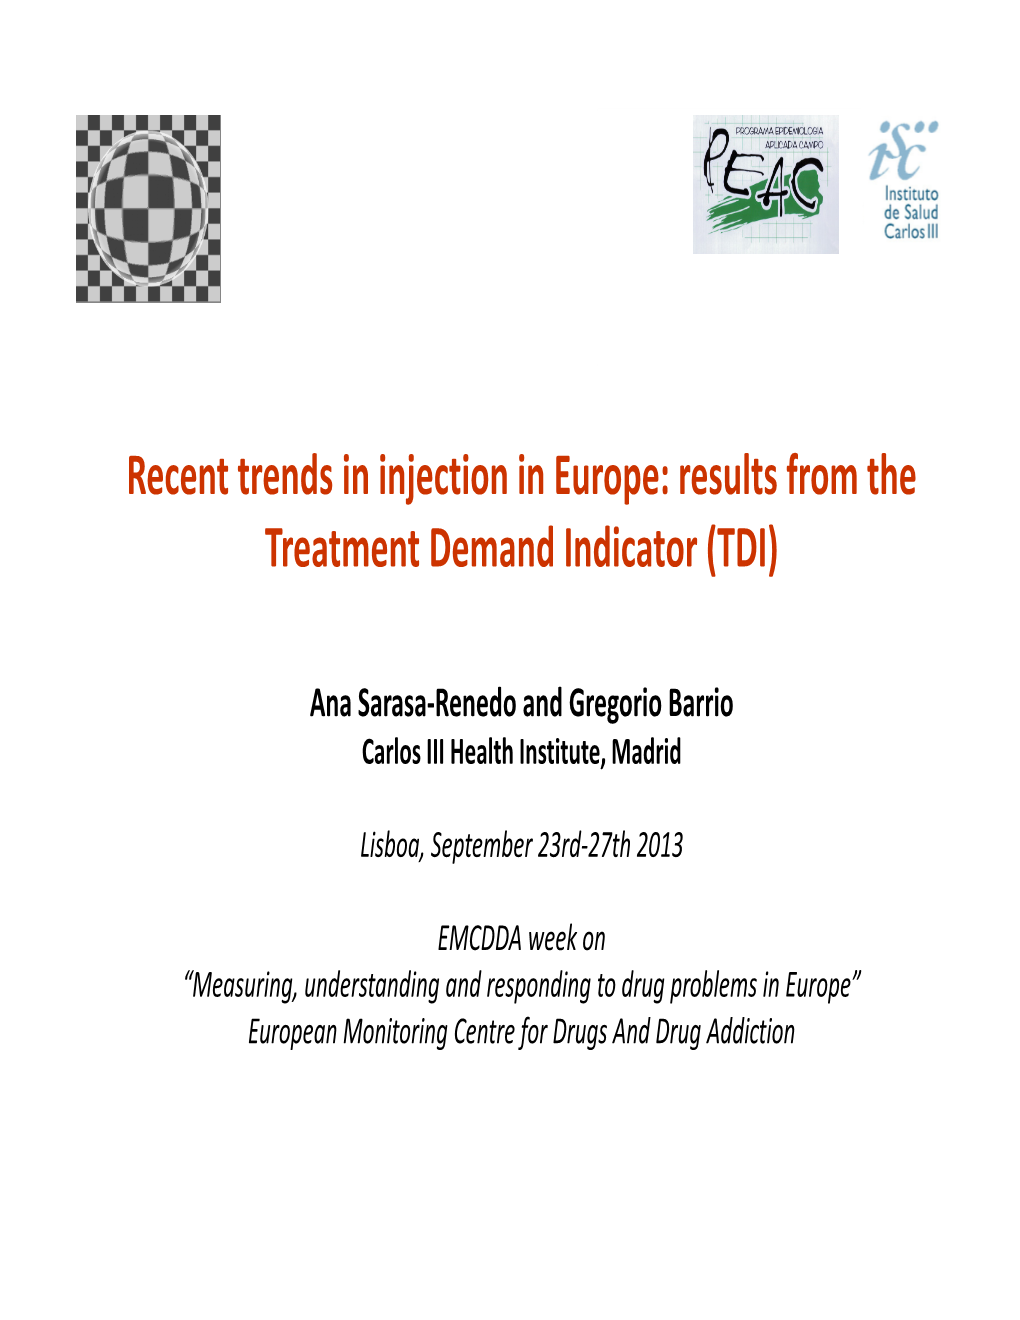 Recent Trends in Injection in Europe: Results from the Treatment Demand Indicator (TDI)